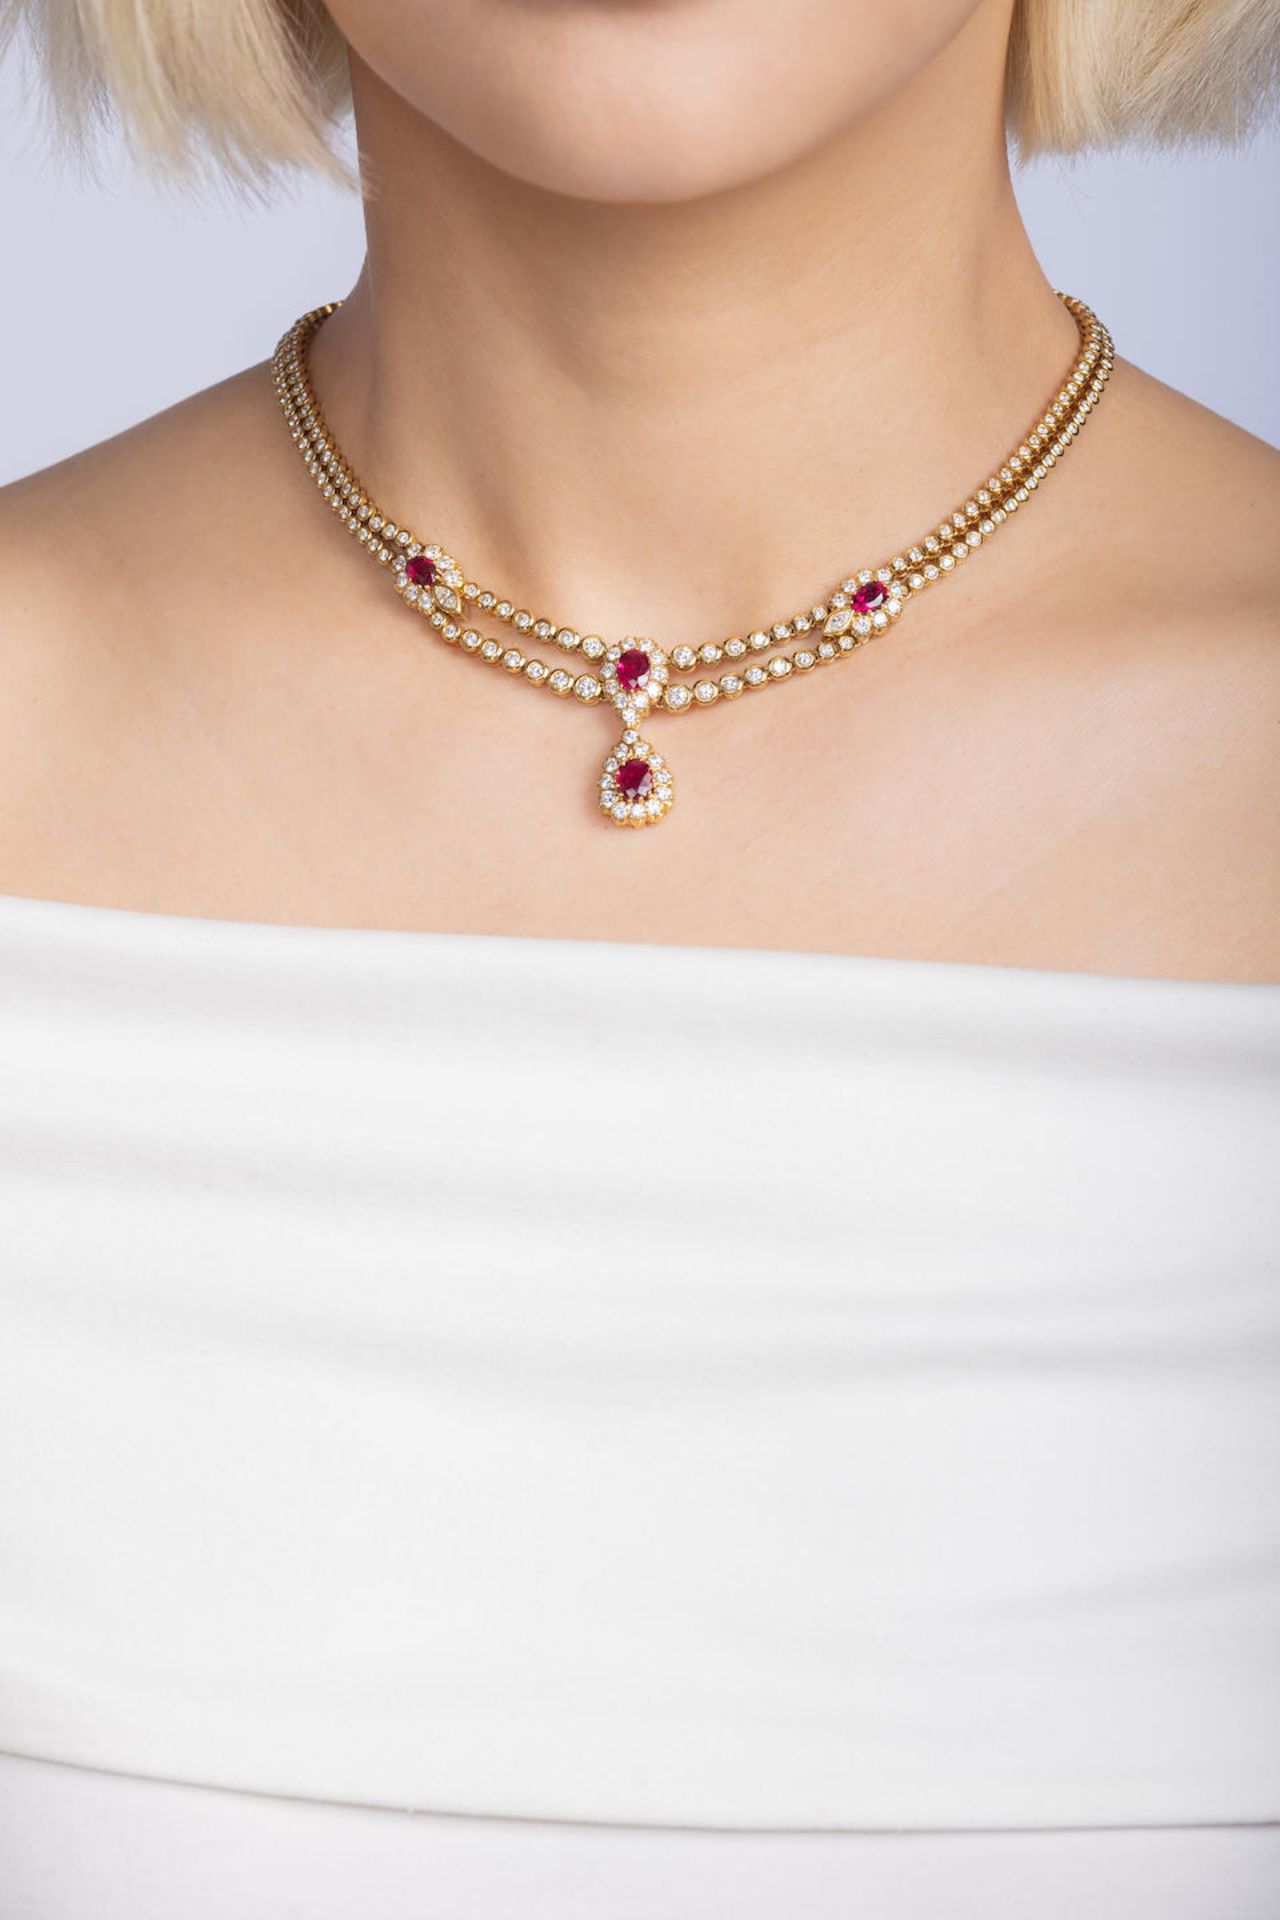 RUBY AND DIAMOND NECKLACE - Image 2 of 2